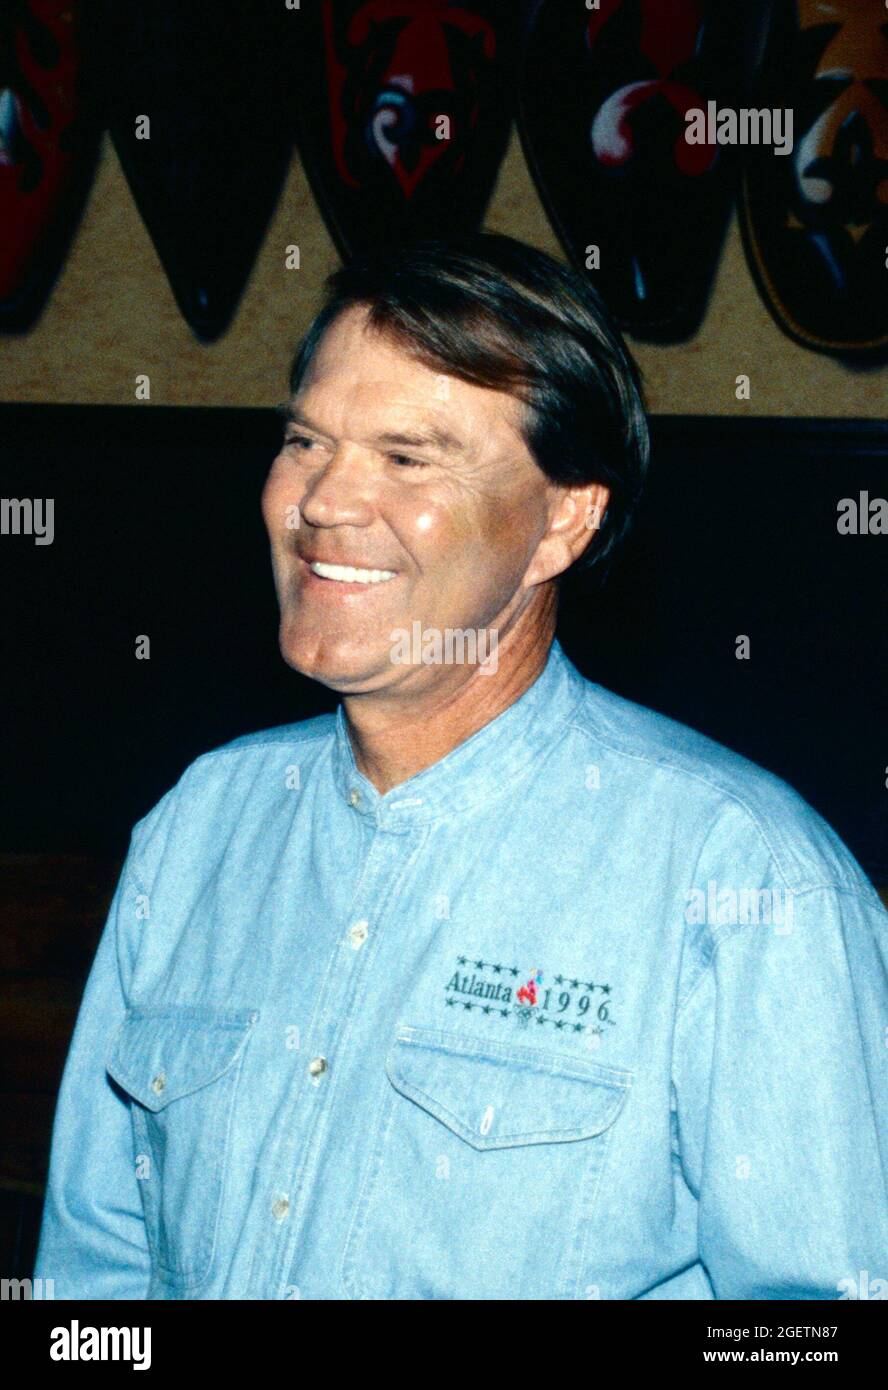 Glen Campbell  at Campbell's surprise 60th birthday celebration in Branson, Missouri on April 20, 1996, two days before his actual birthday. Stock Photo